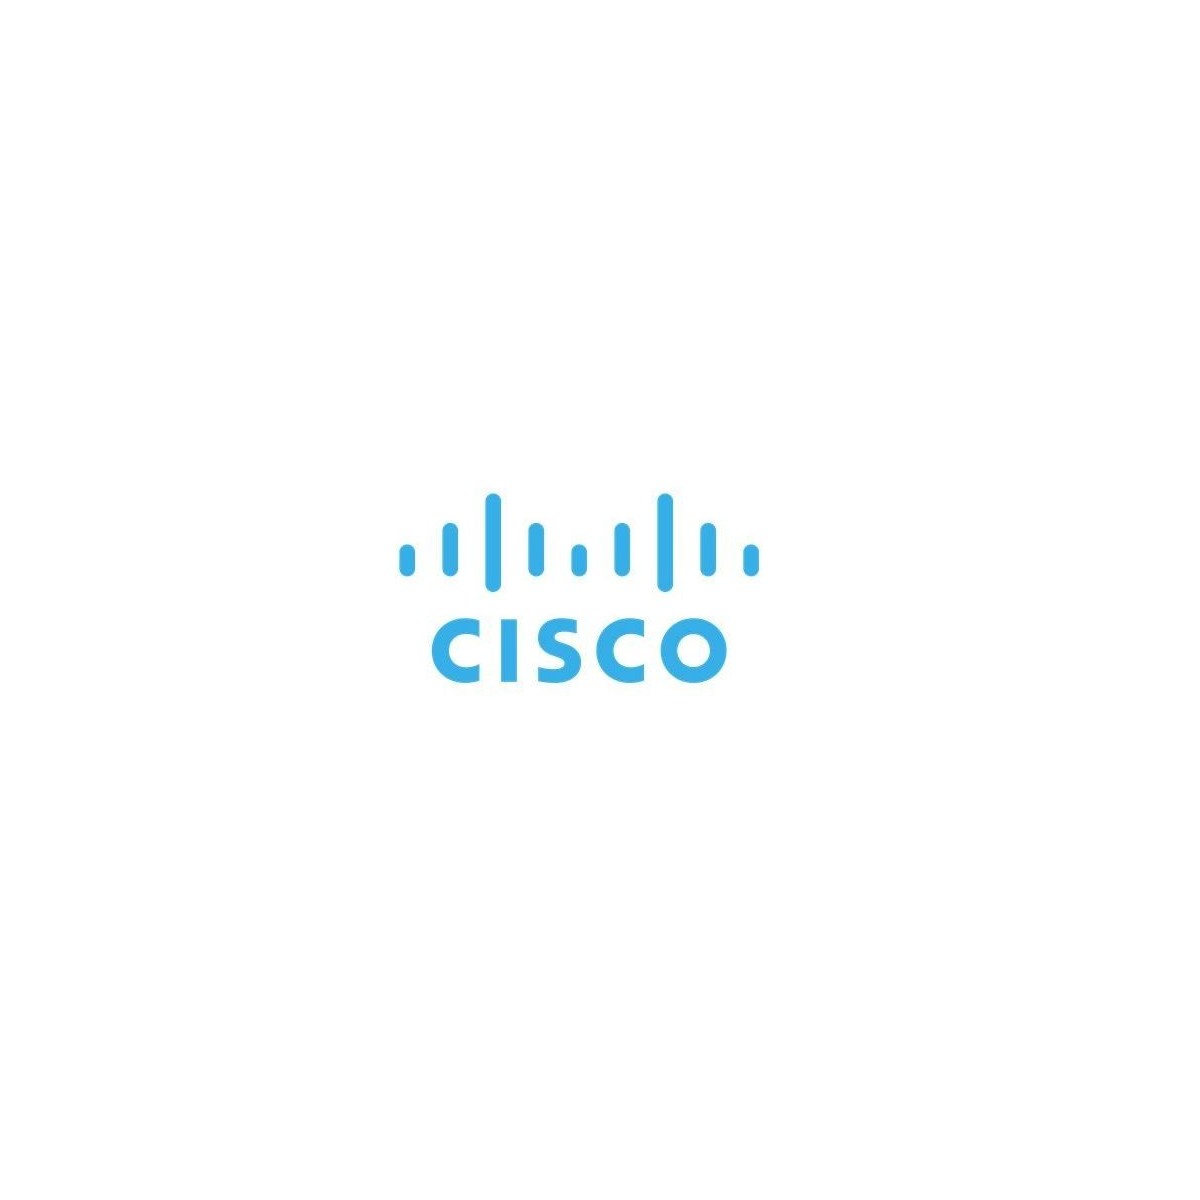 Cisco 120 GB SSD - Hot-Swap - USB 3.0 - Solid State Disk - 120 GB